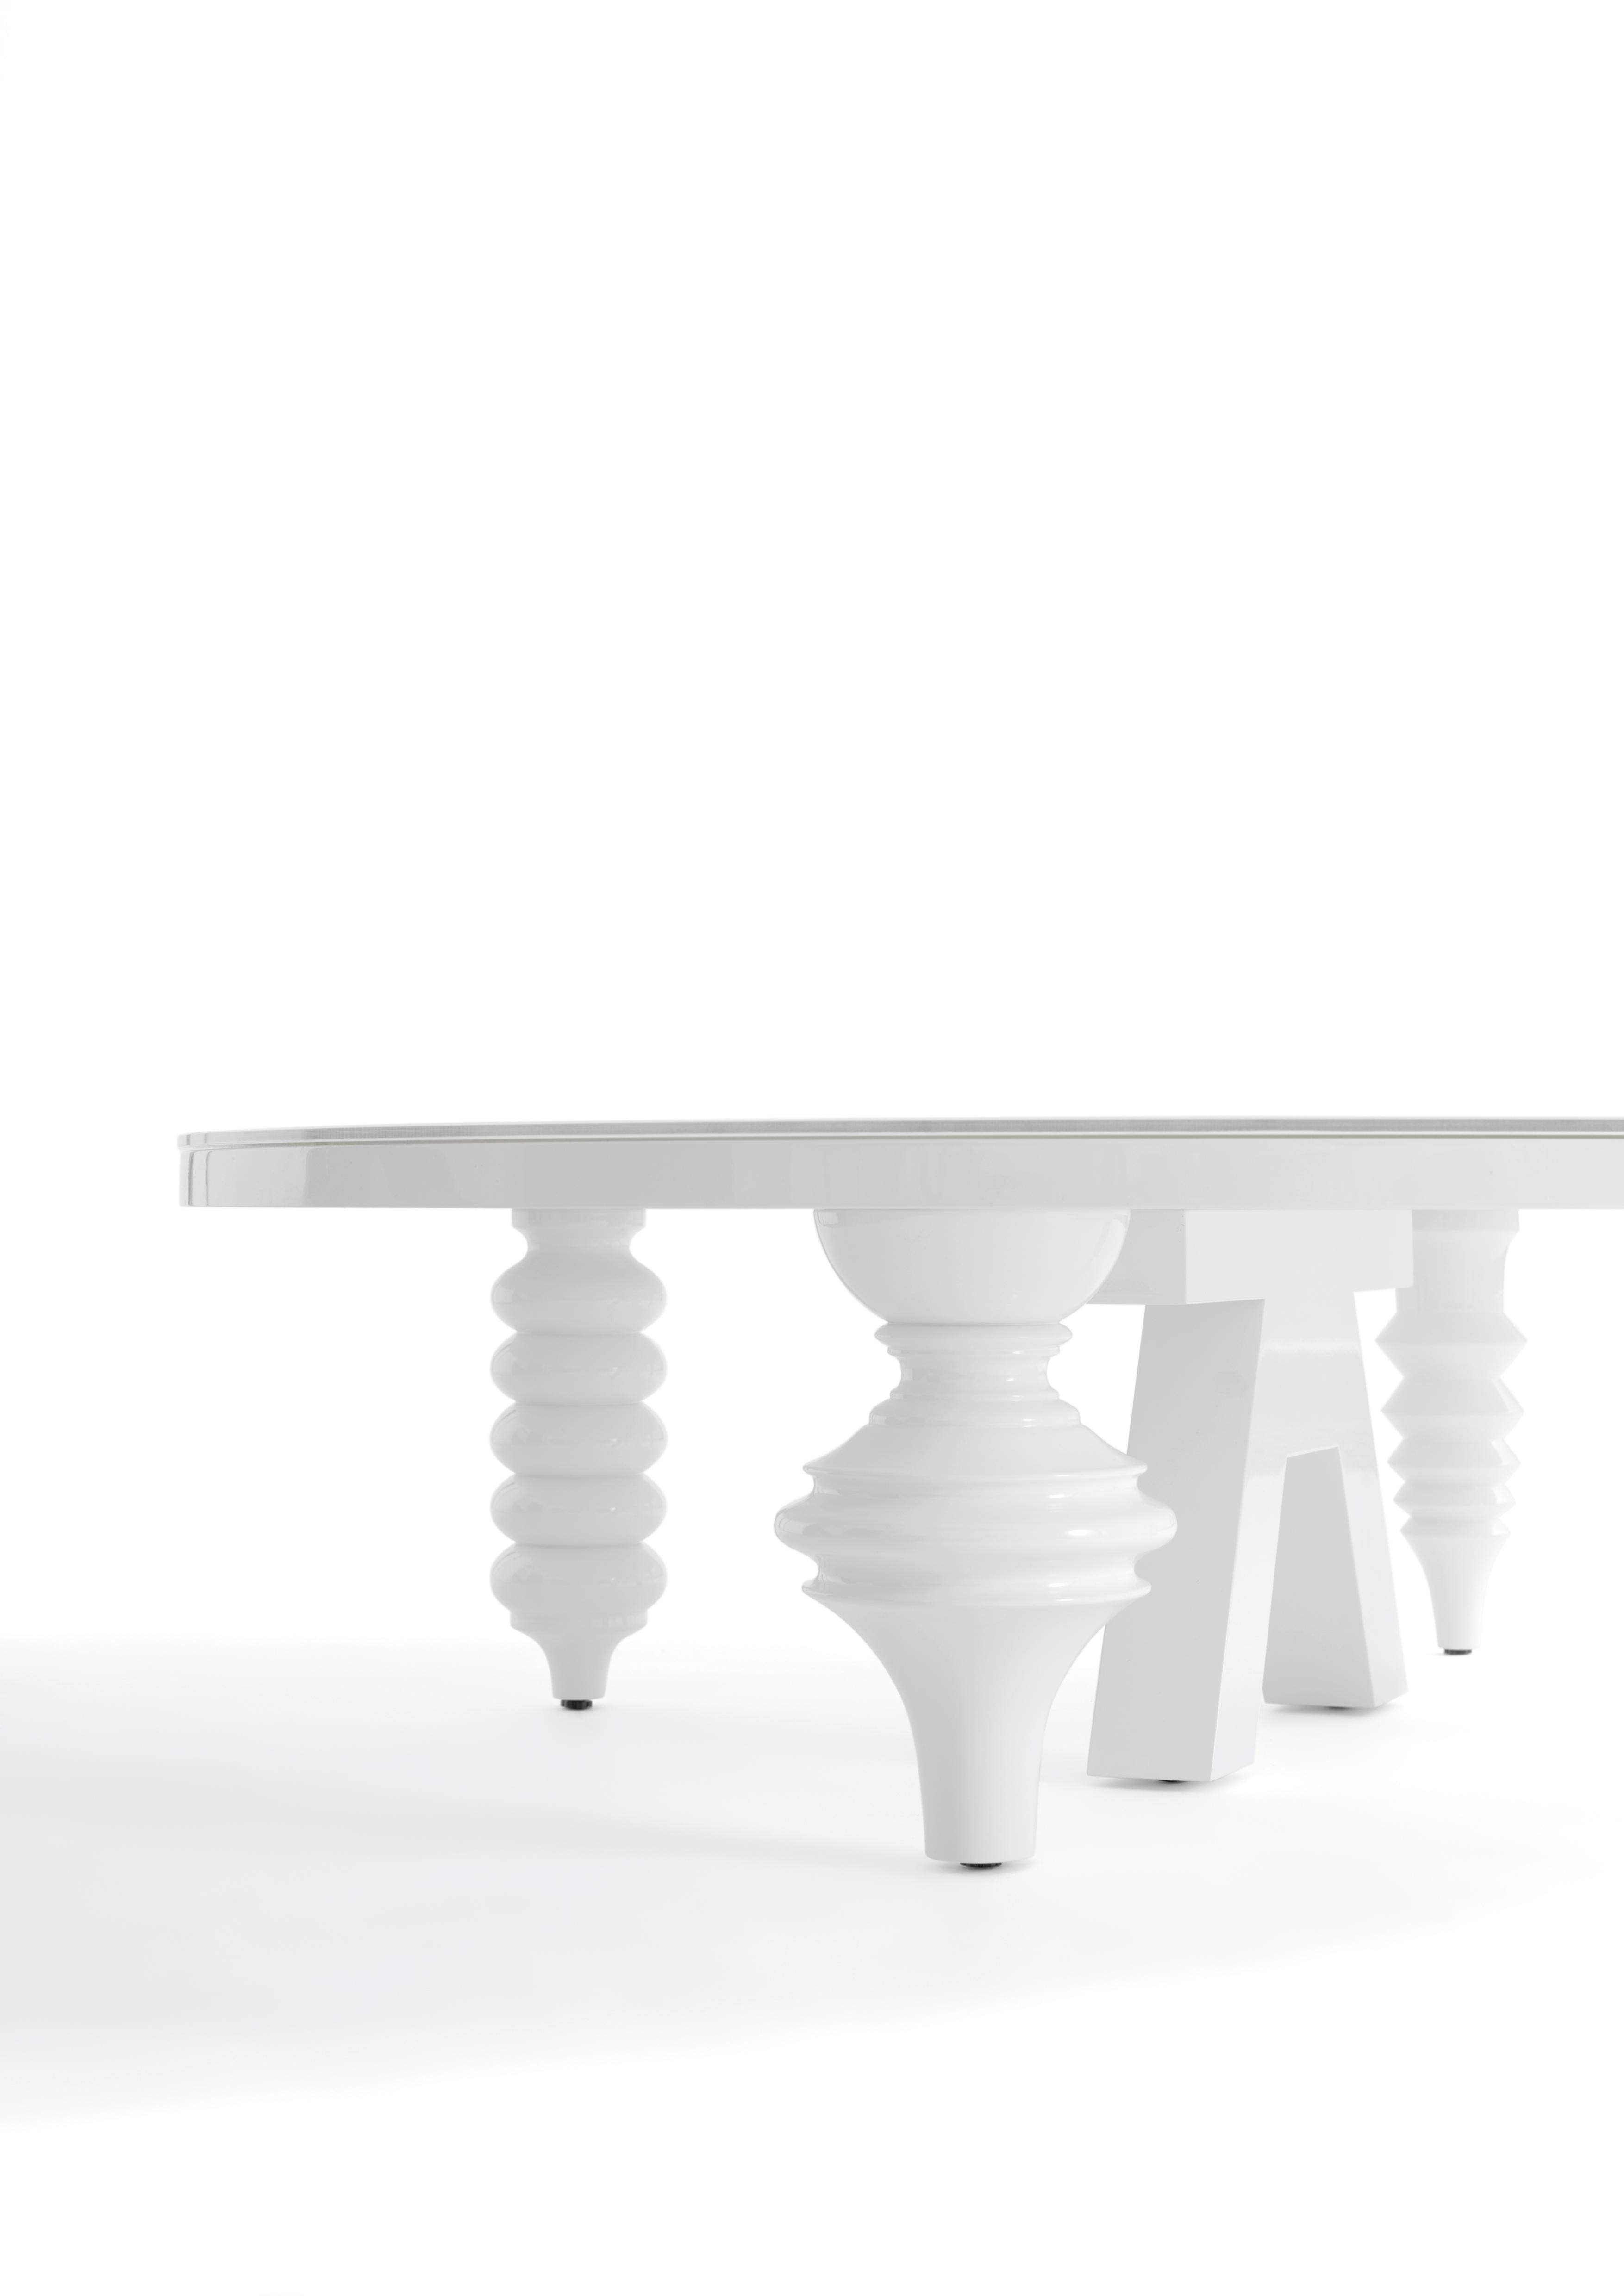 The Multileg Table came about in an obvious way, springing from the Multileg Cabinet. Using the same legs, Jaime designed four table tops, converting them into functional sculptural centre pieces.

Base in MDF. Glass top of 8 mm lacquered on the